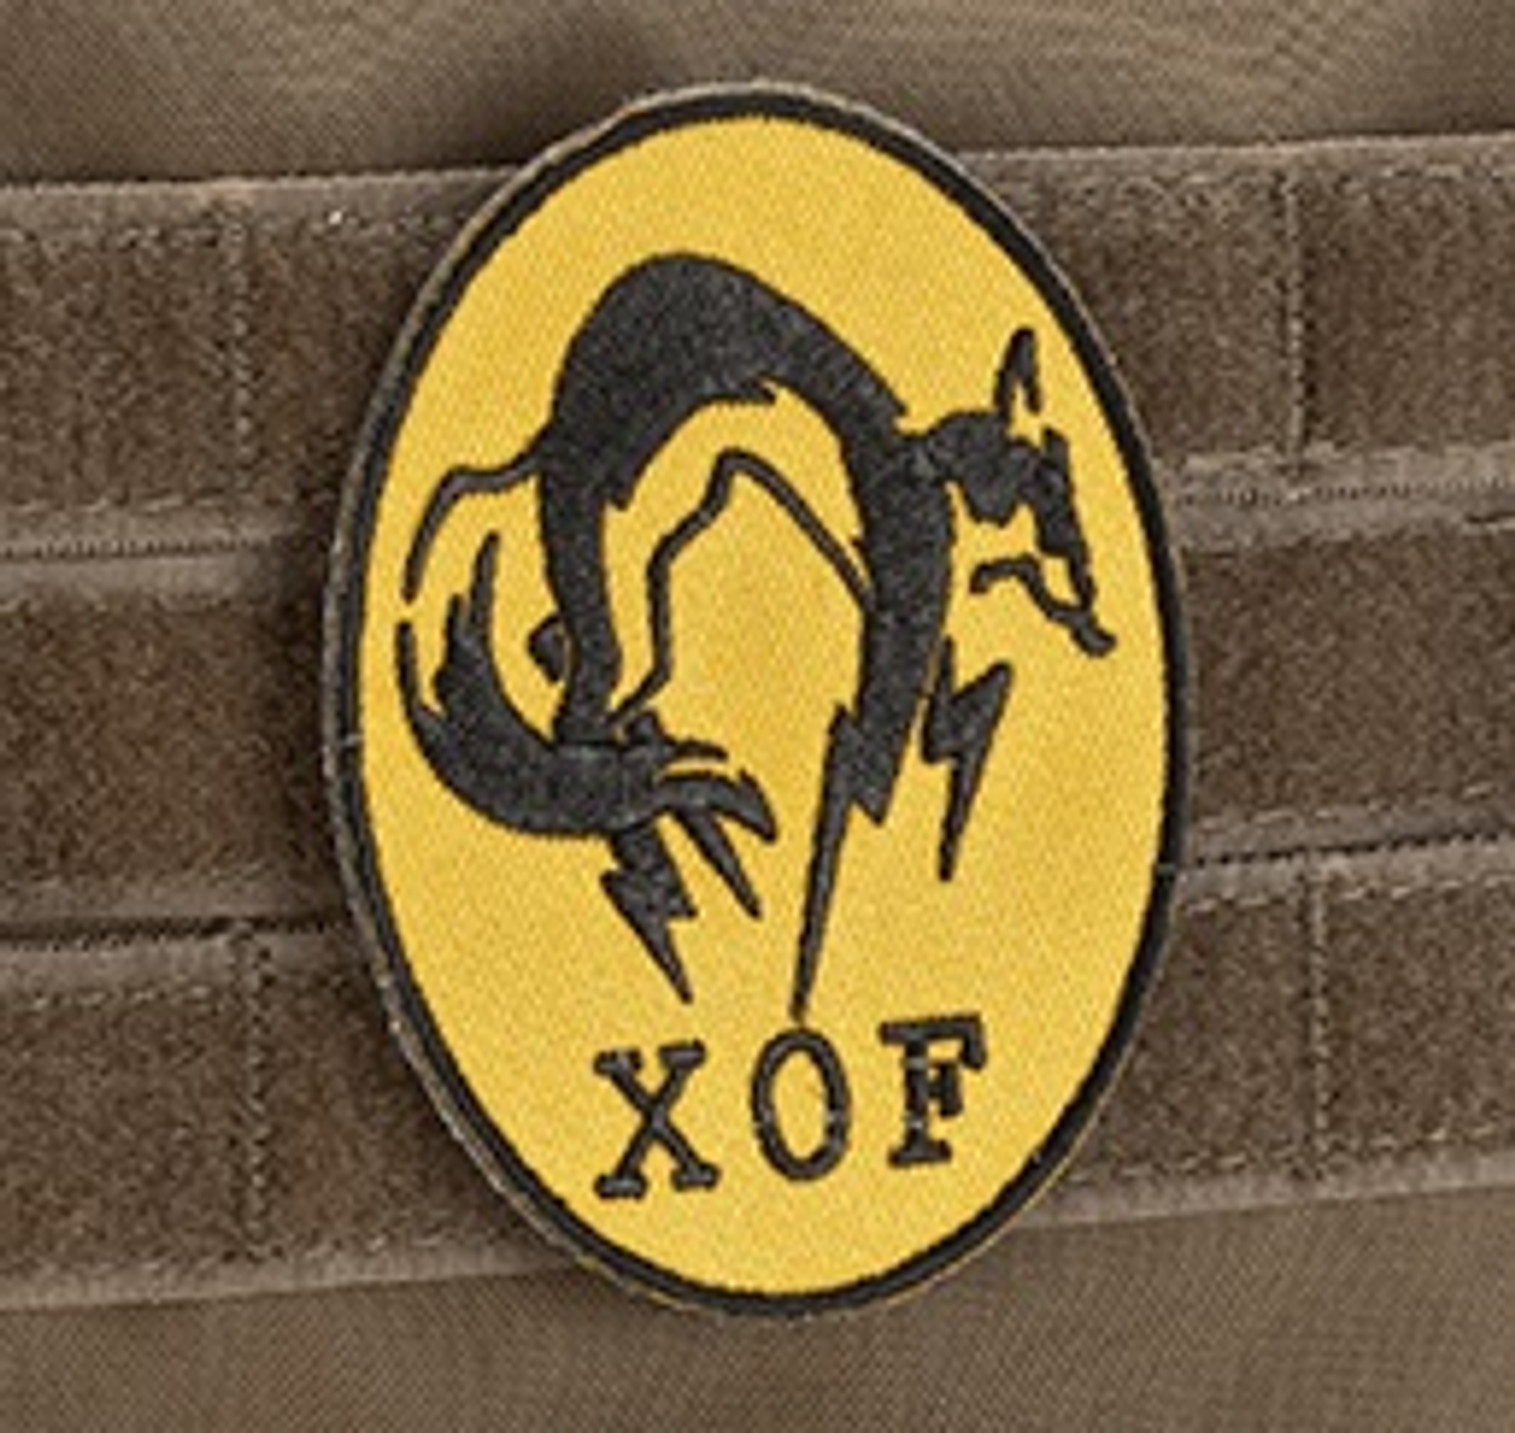 High Quality Embroidered IFF Hook and Loop Patch - XOF